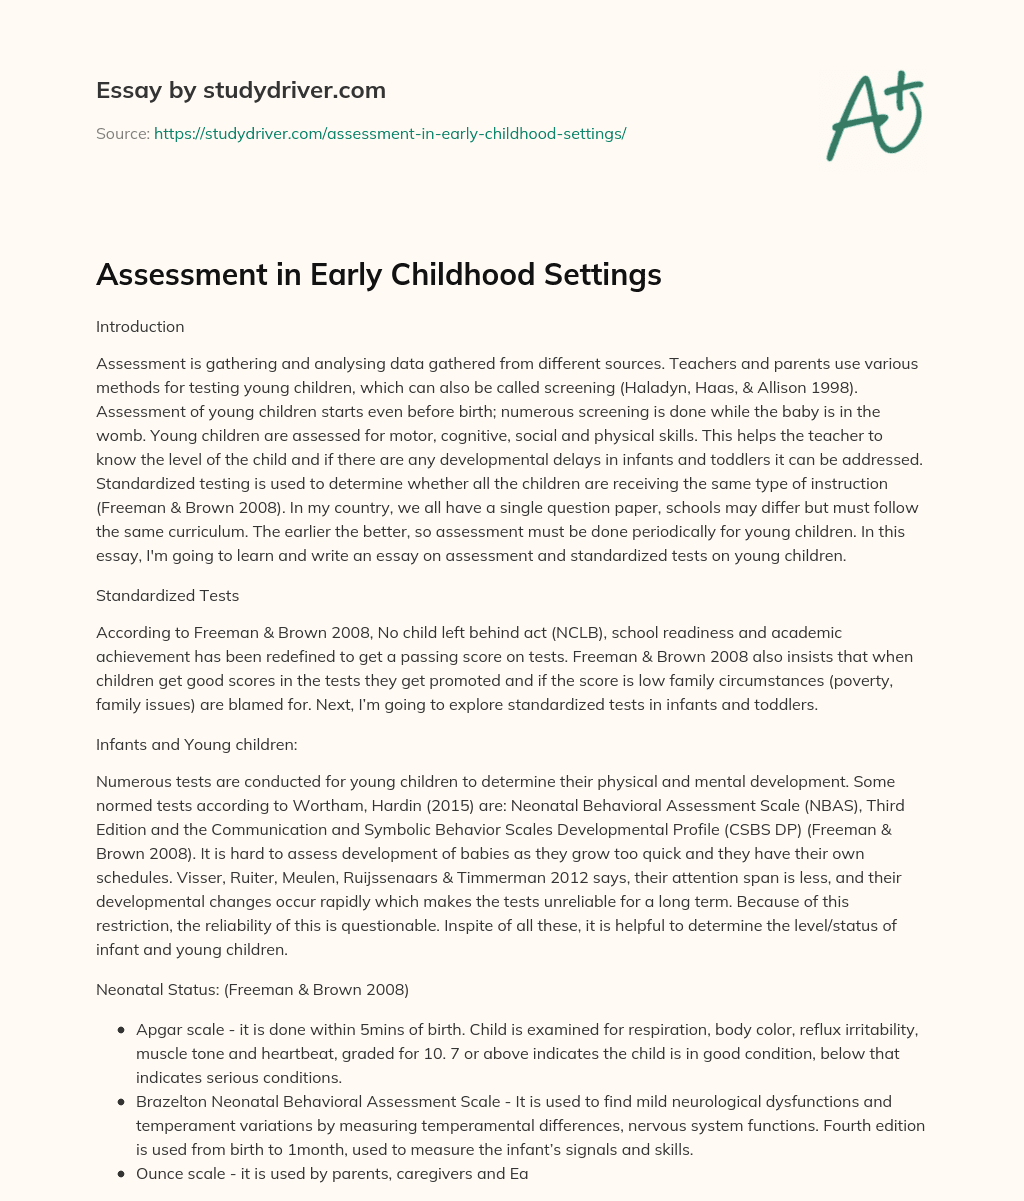 Assessment in Early Childhood Settings essay